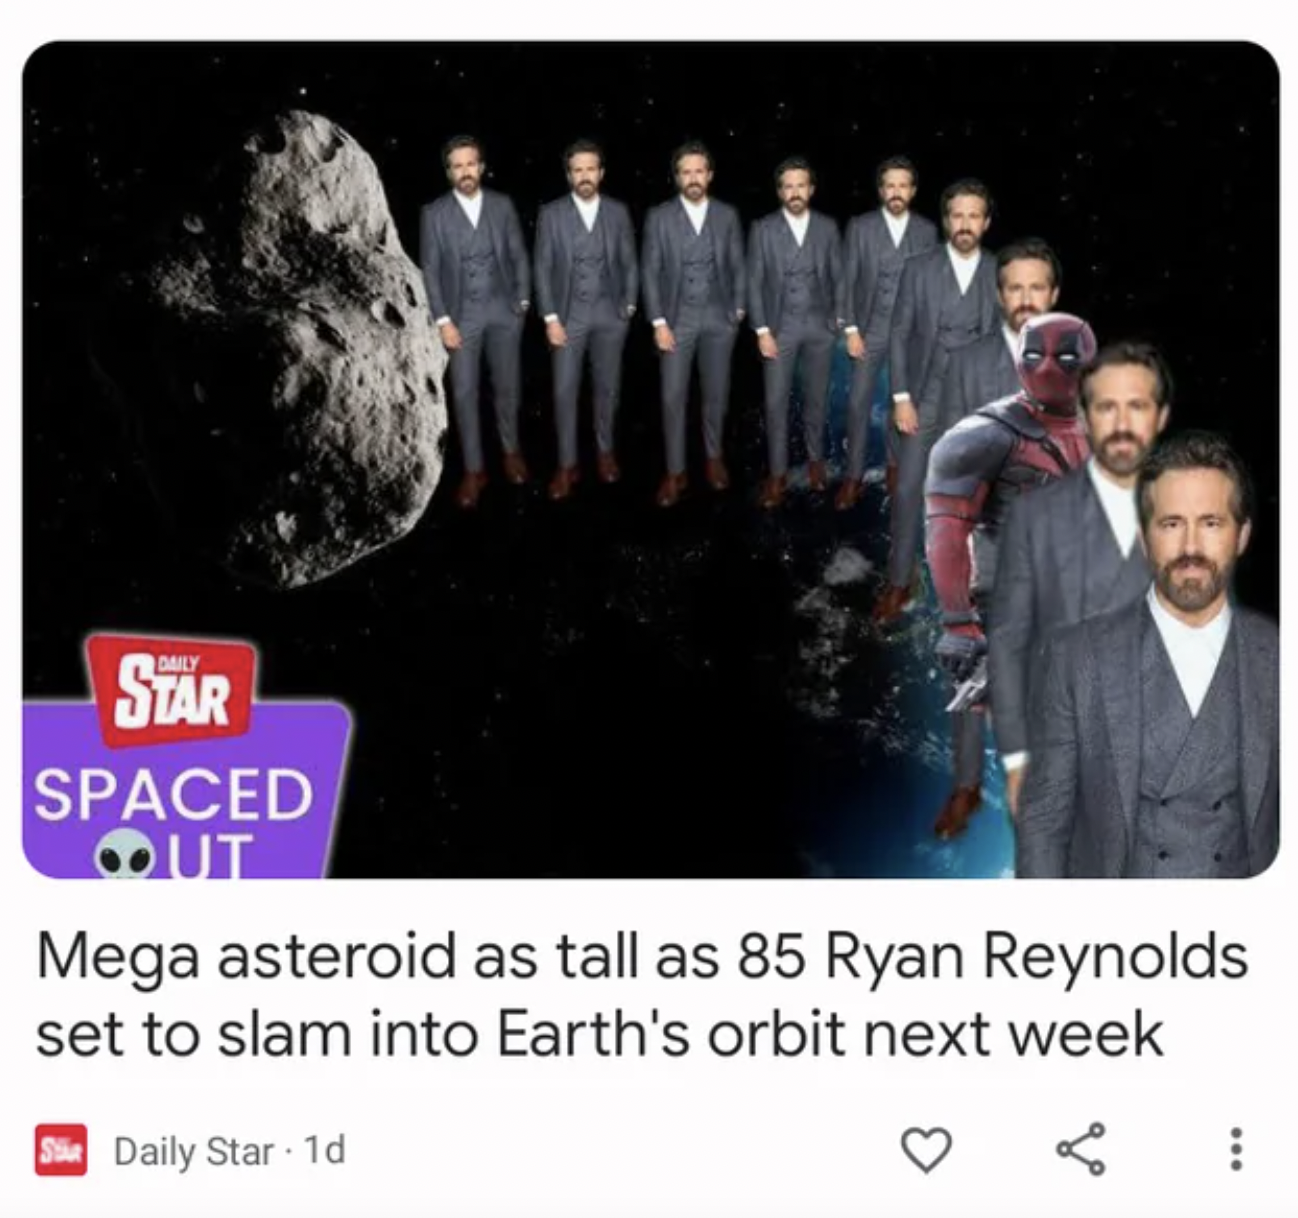 Facepalms - human behavior - Star Spaced Out Mega asteroid as tall as 85 Ryan Reynolds set to slam into Earth's orbit next week Daily Star 1d